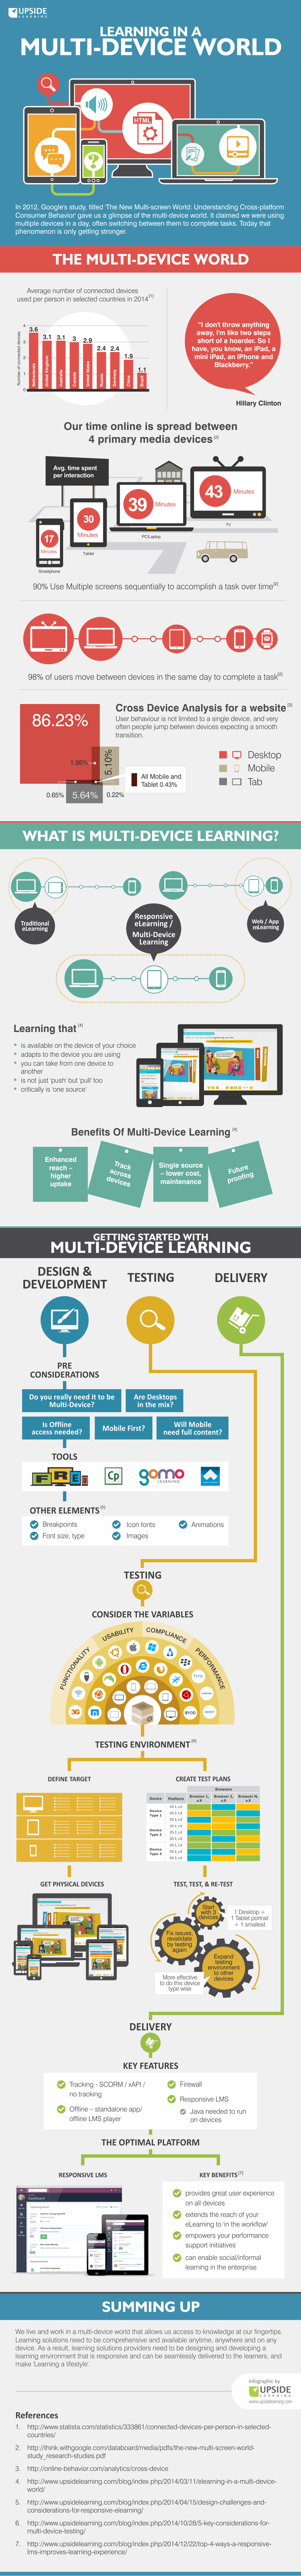 Learning in a Multi-device World Infographic